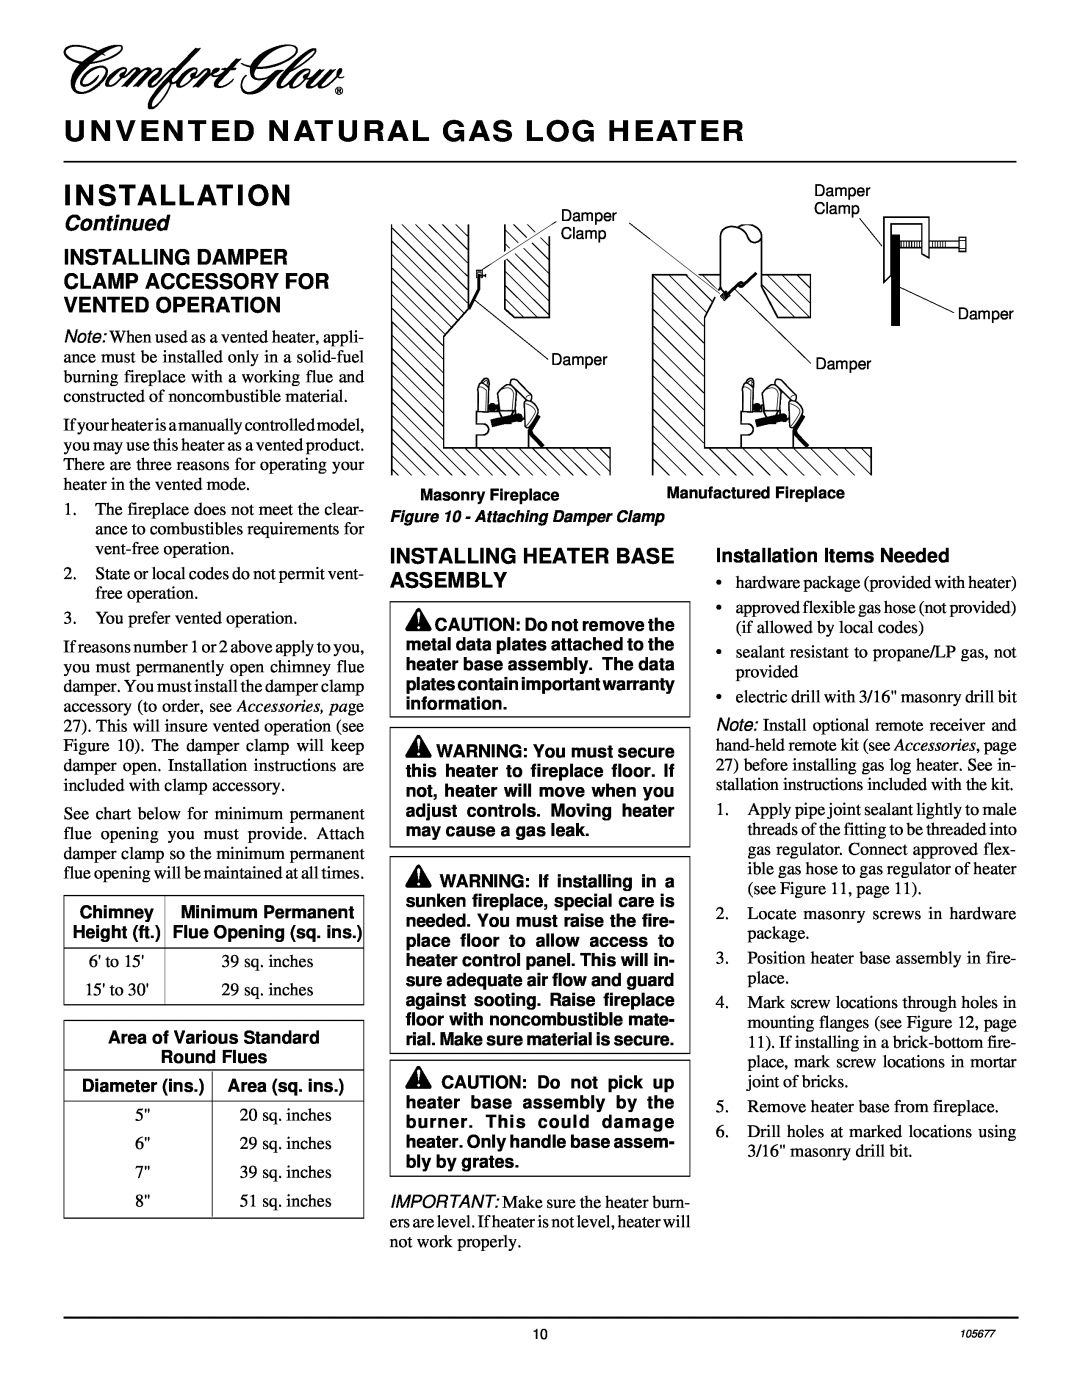 Desa CGB3924NRA, CGD3924NRA Installing Heater Base Assembly, Unvented Natural Gas Log Heater, Installation, Continued 